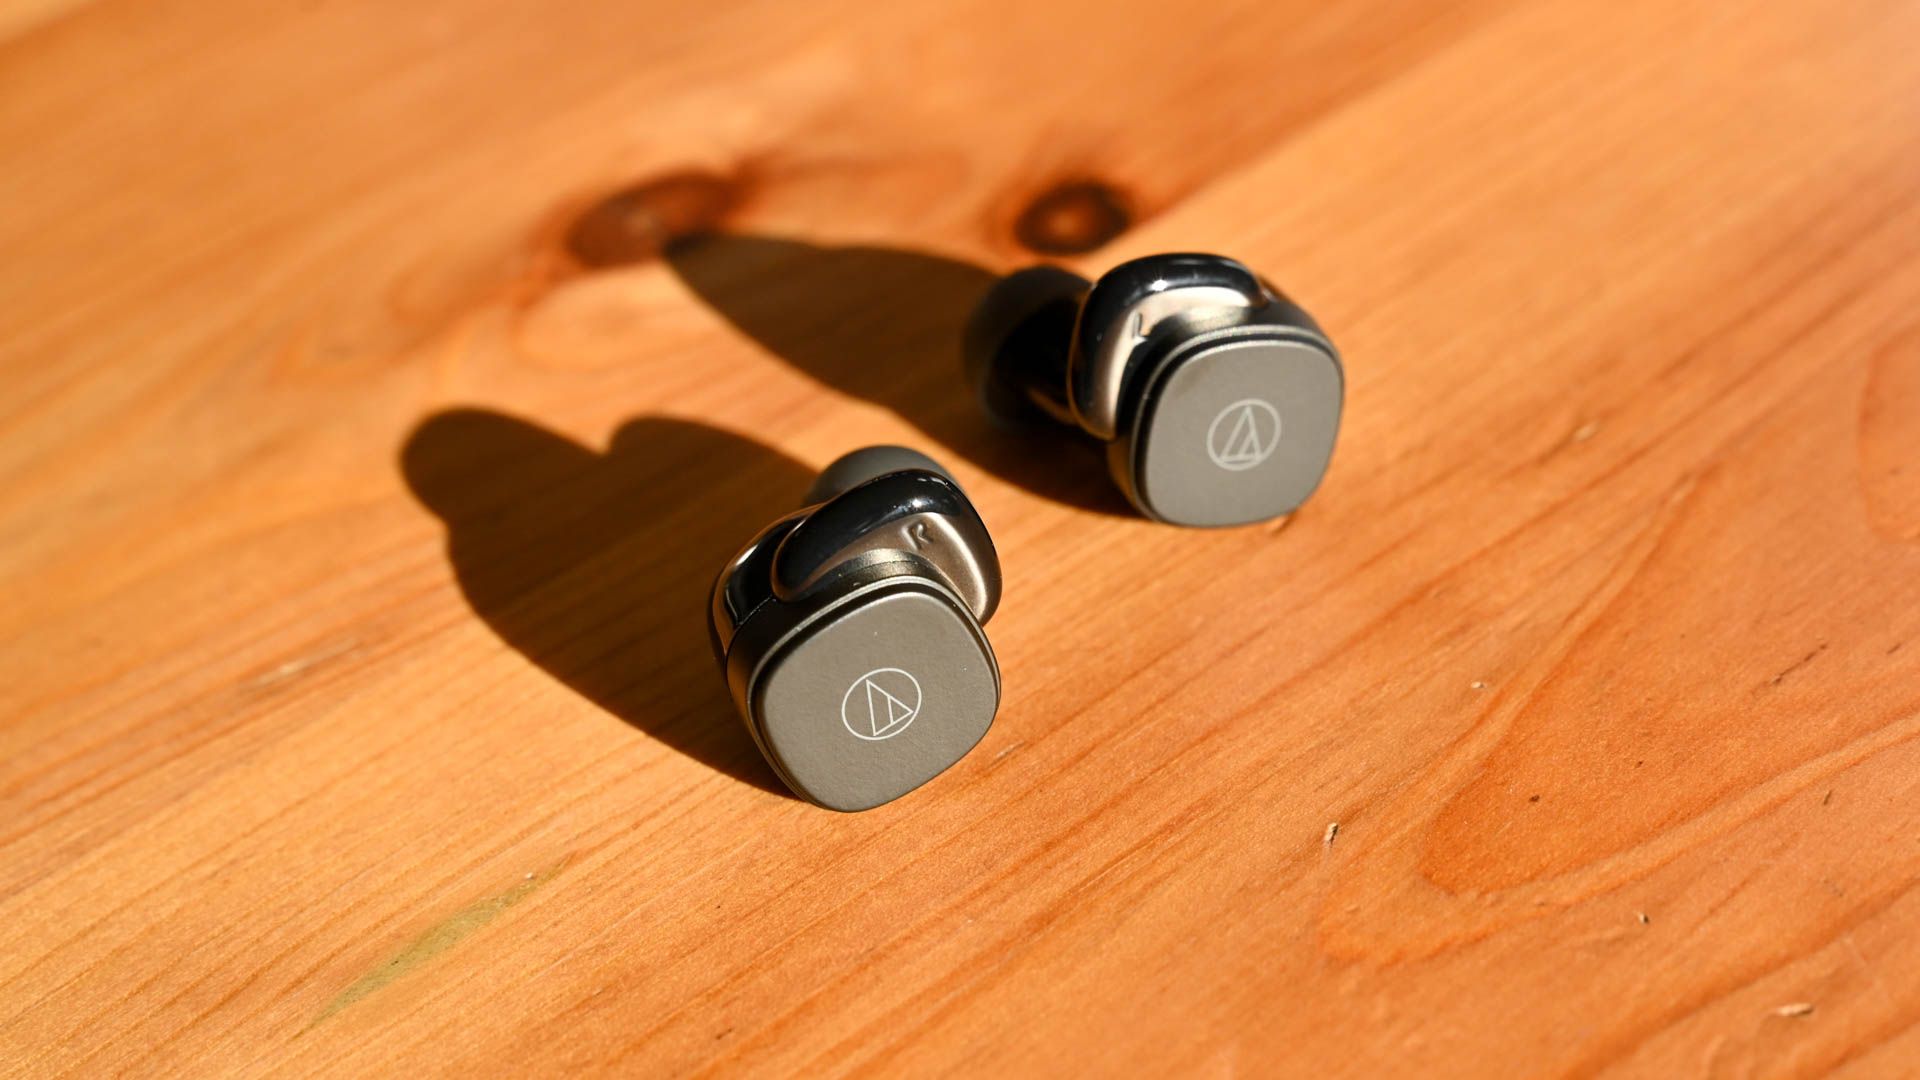 Two Audio Technica ATH-SQ1TW earbuds on a wood table